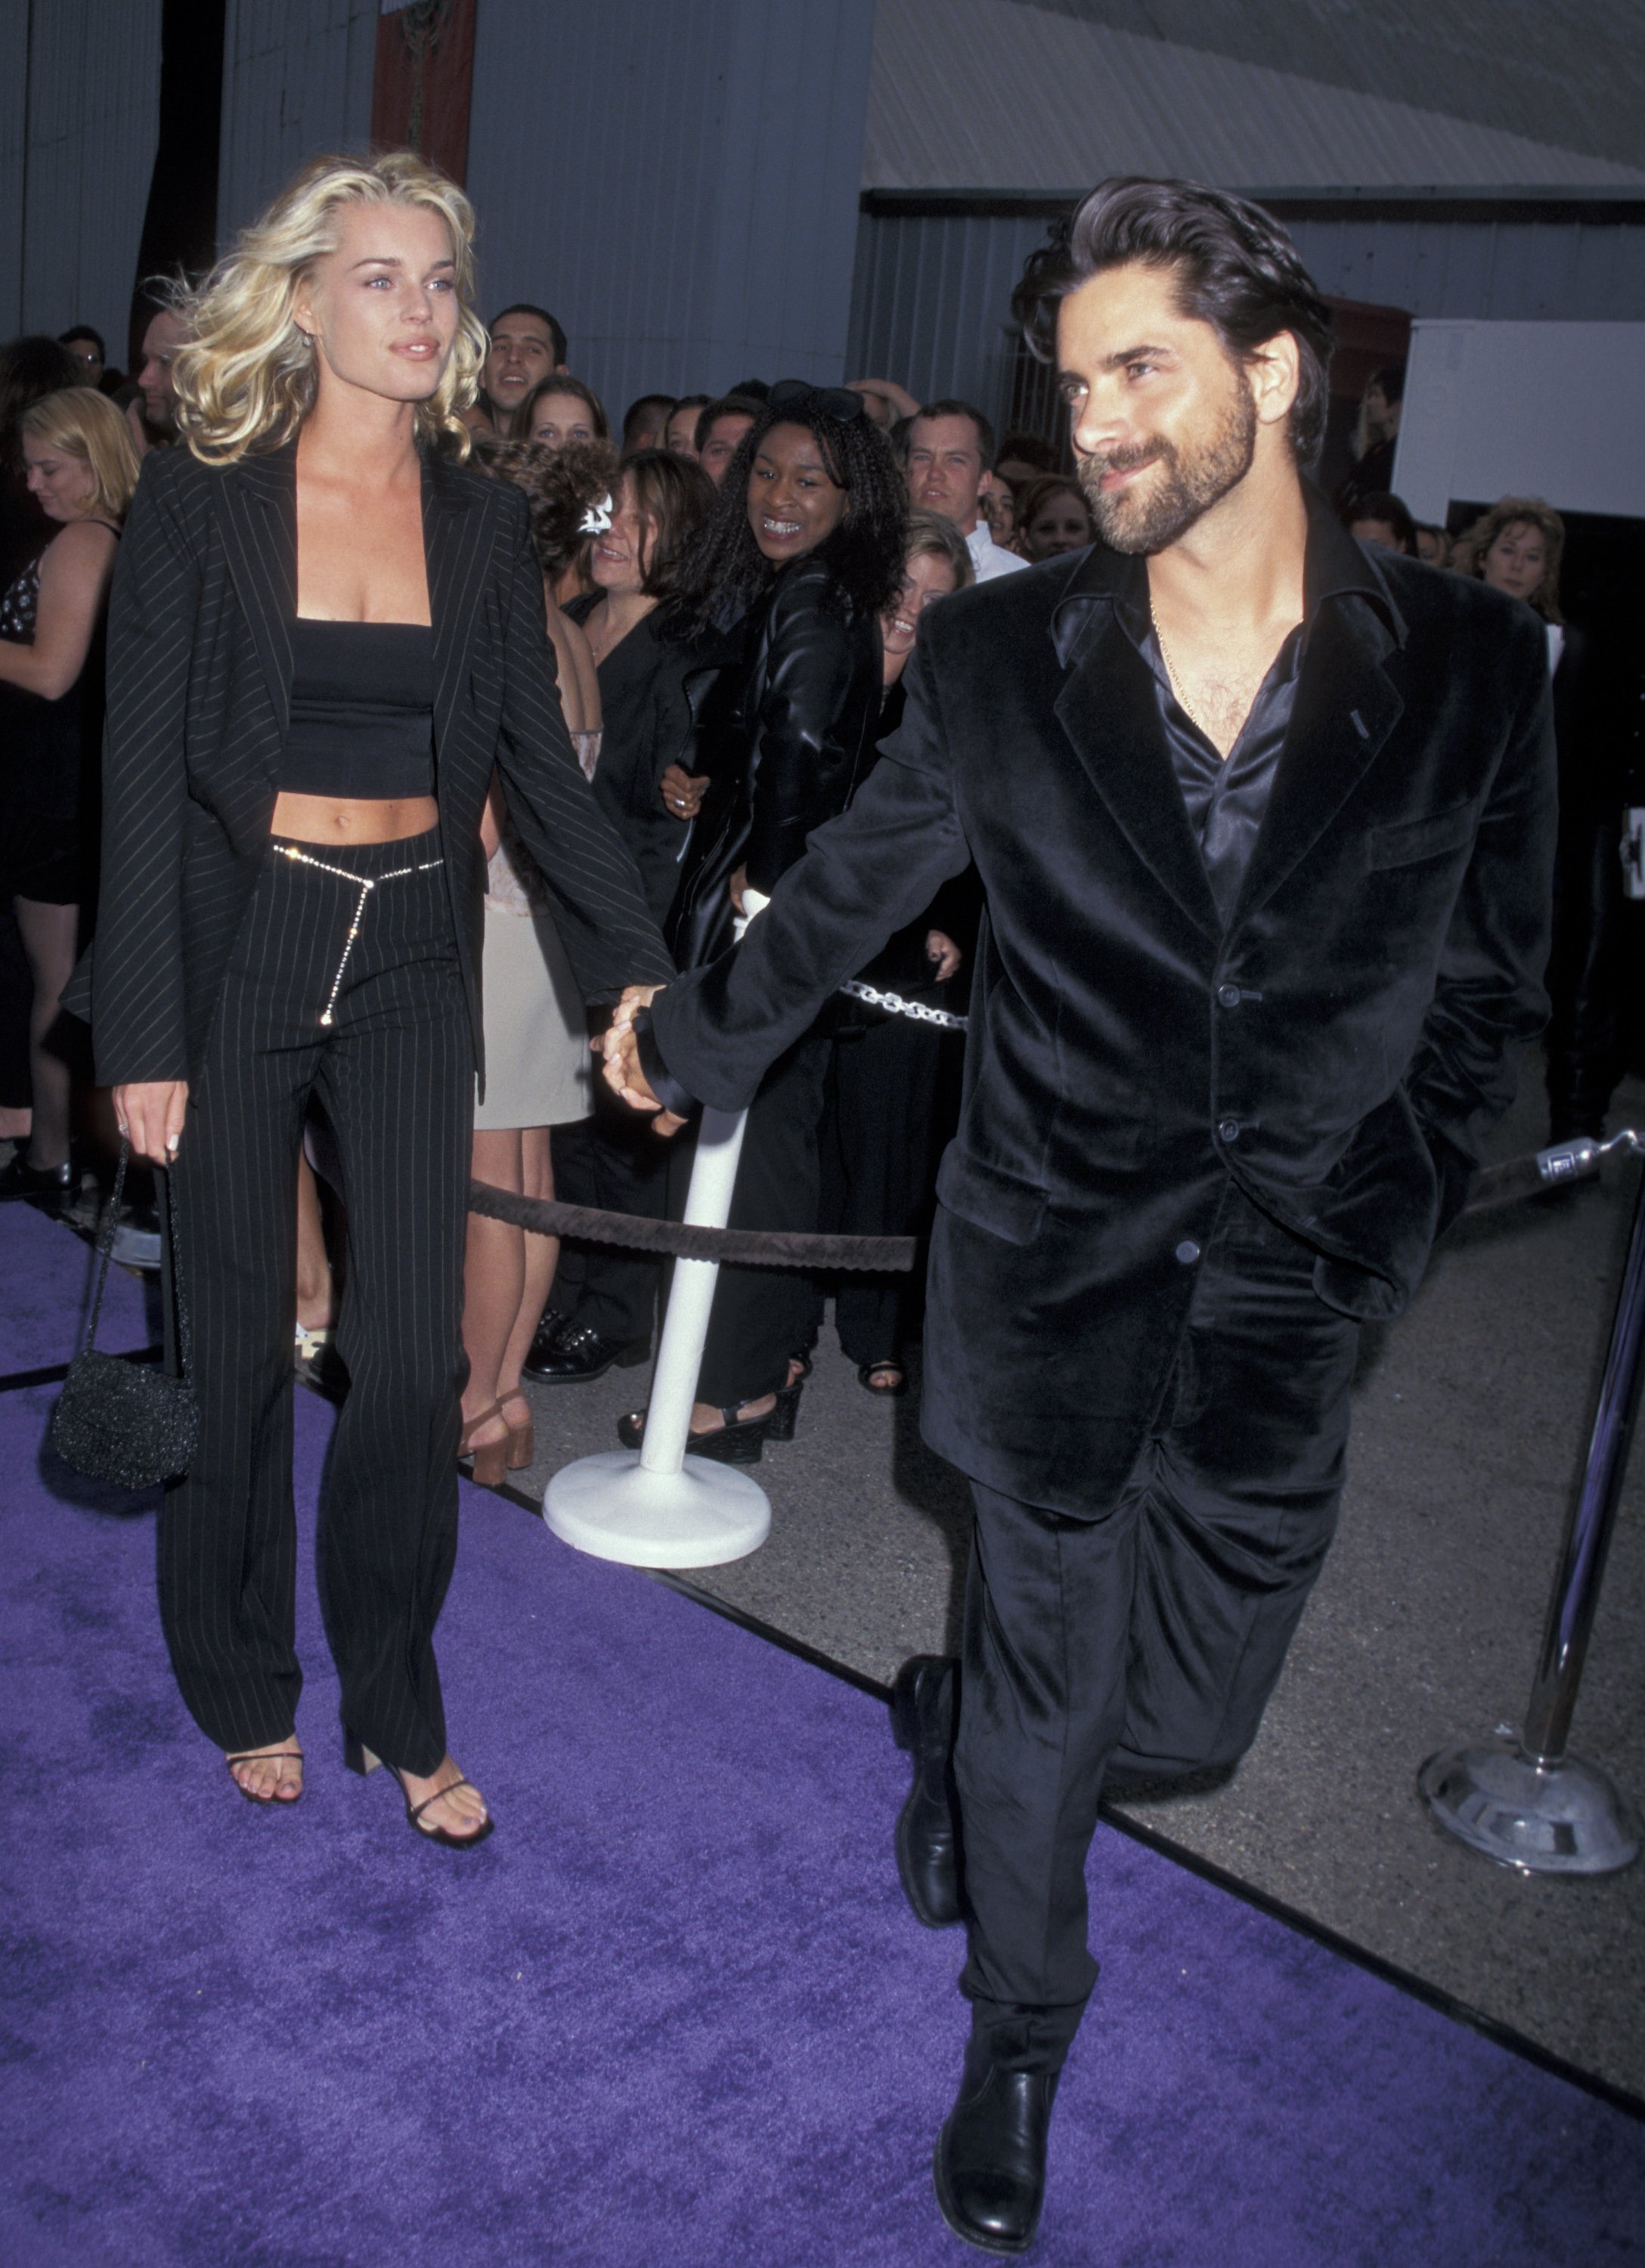 Rebecca Romijn and John Stamos during The 1997 MTV Movie Awards at Barker Hanger in Santa Monica, California, United States | Source: Getty Images 